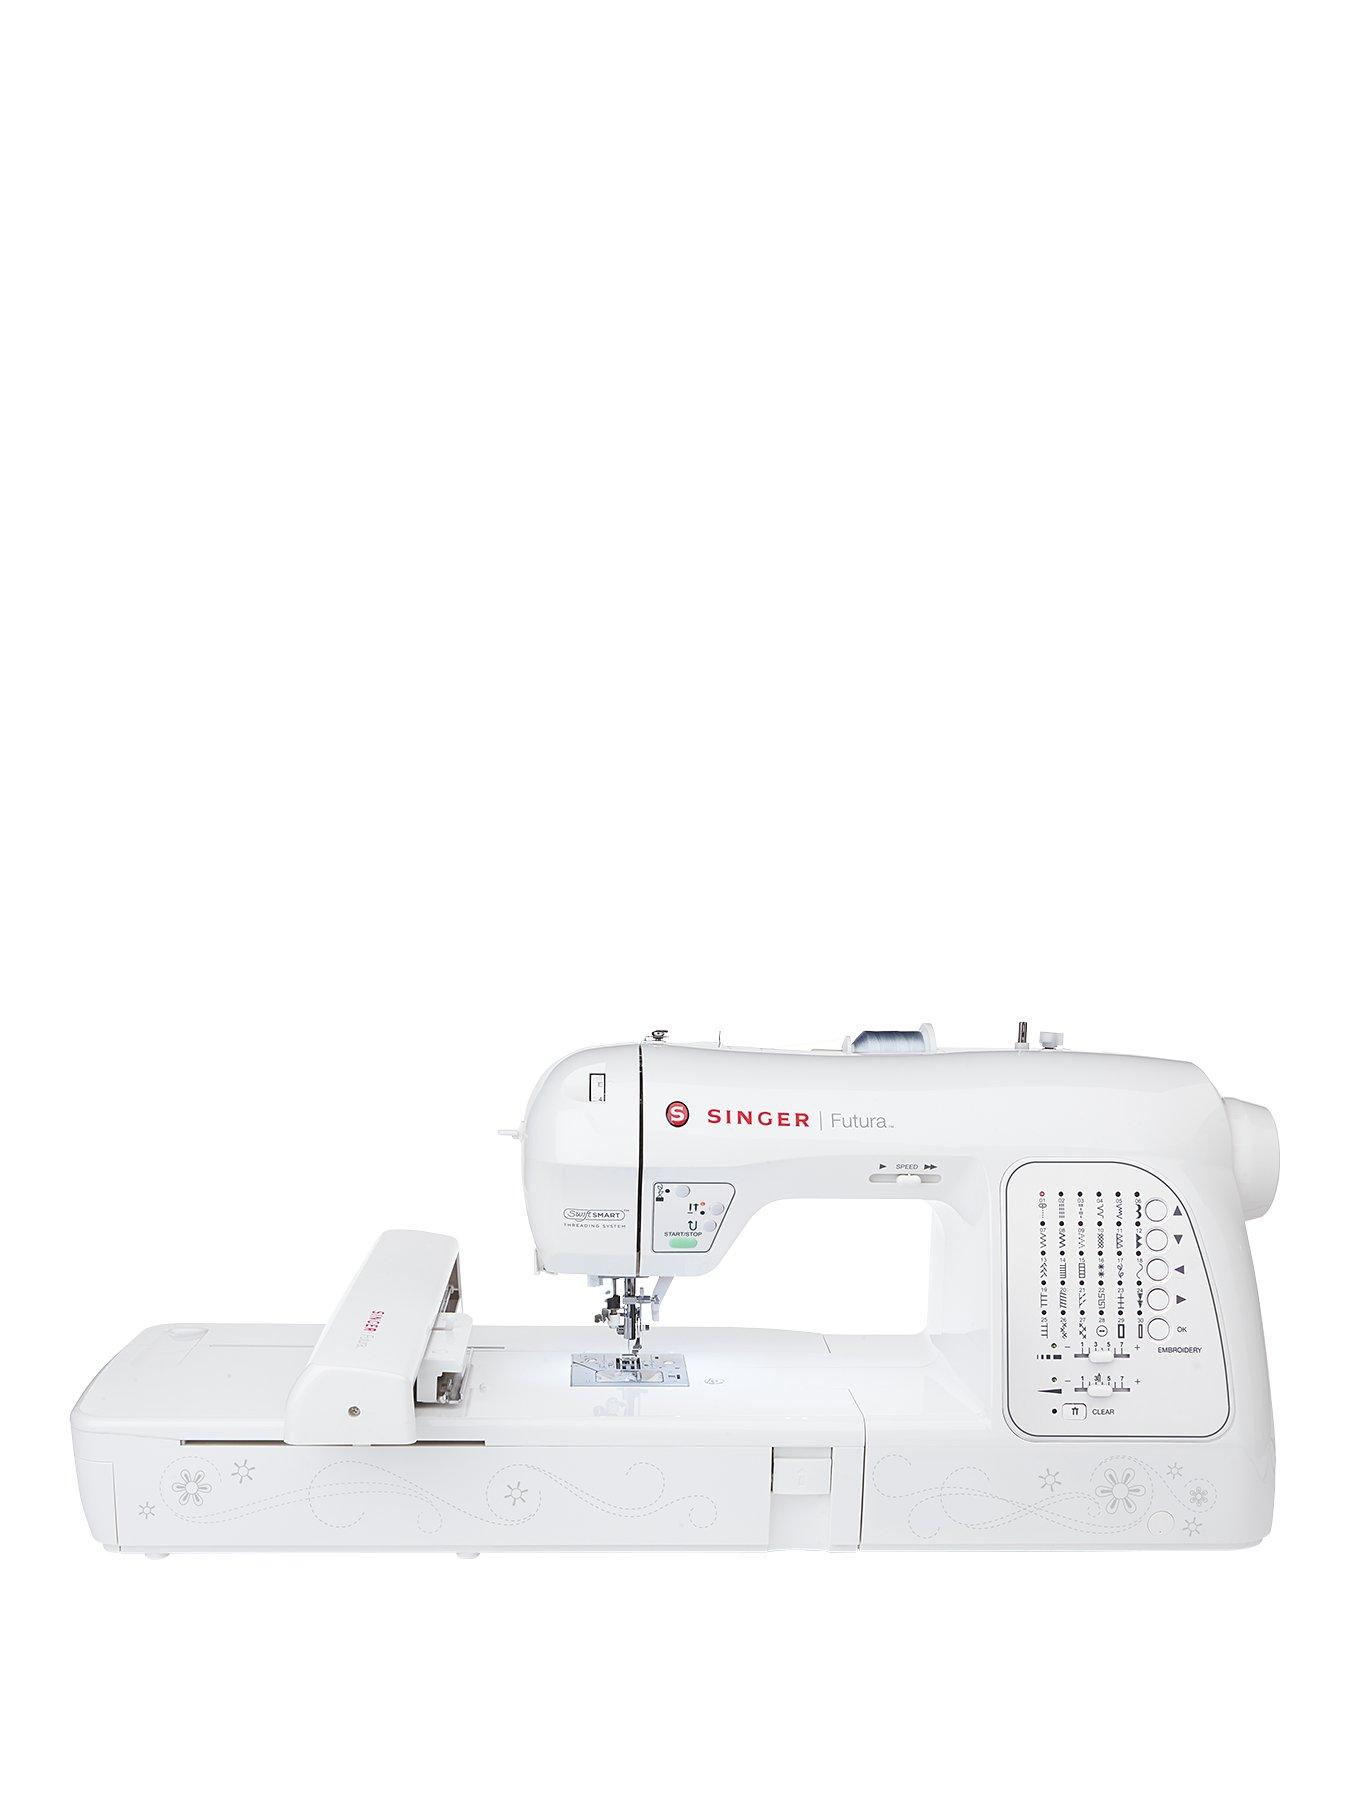 Singer Singer Xl420 Futura Embroidery Sewing Machine